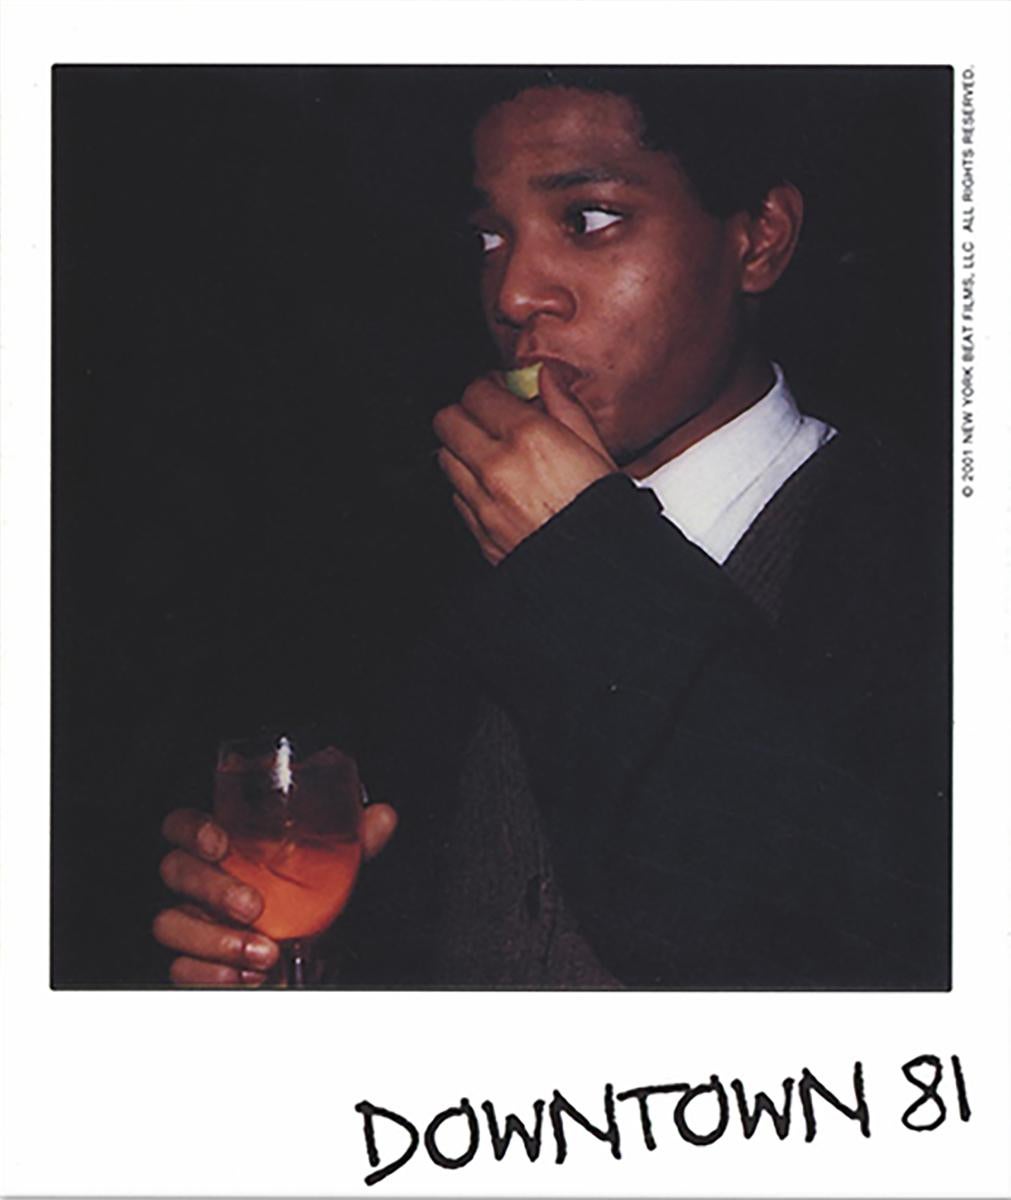 Basquiat Downtown 81 collection (Basquiat, 1981: The Studio of the Street)  - Art by Jean-Michel Basquiat